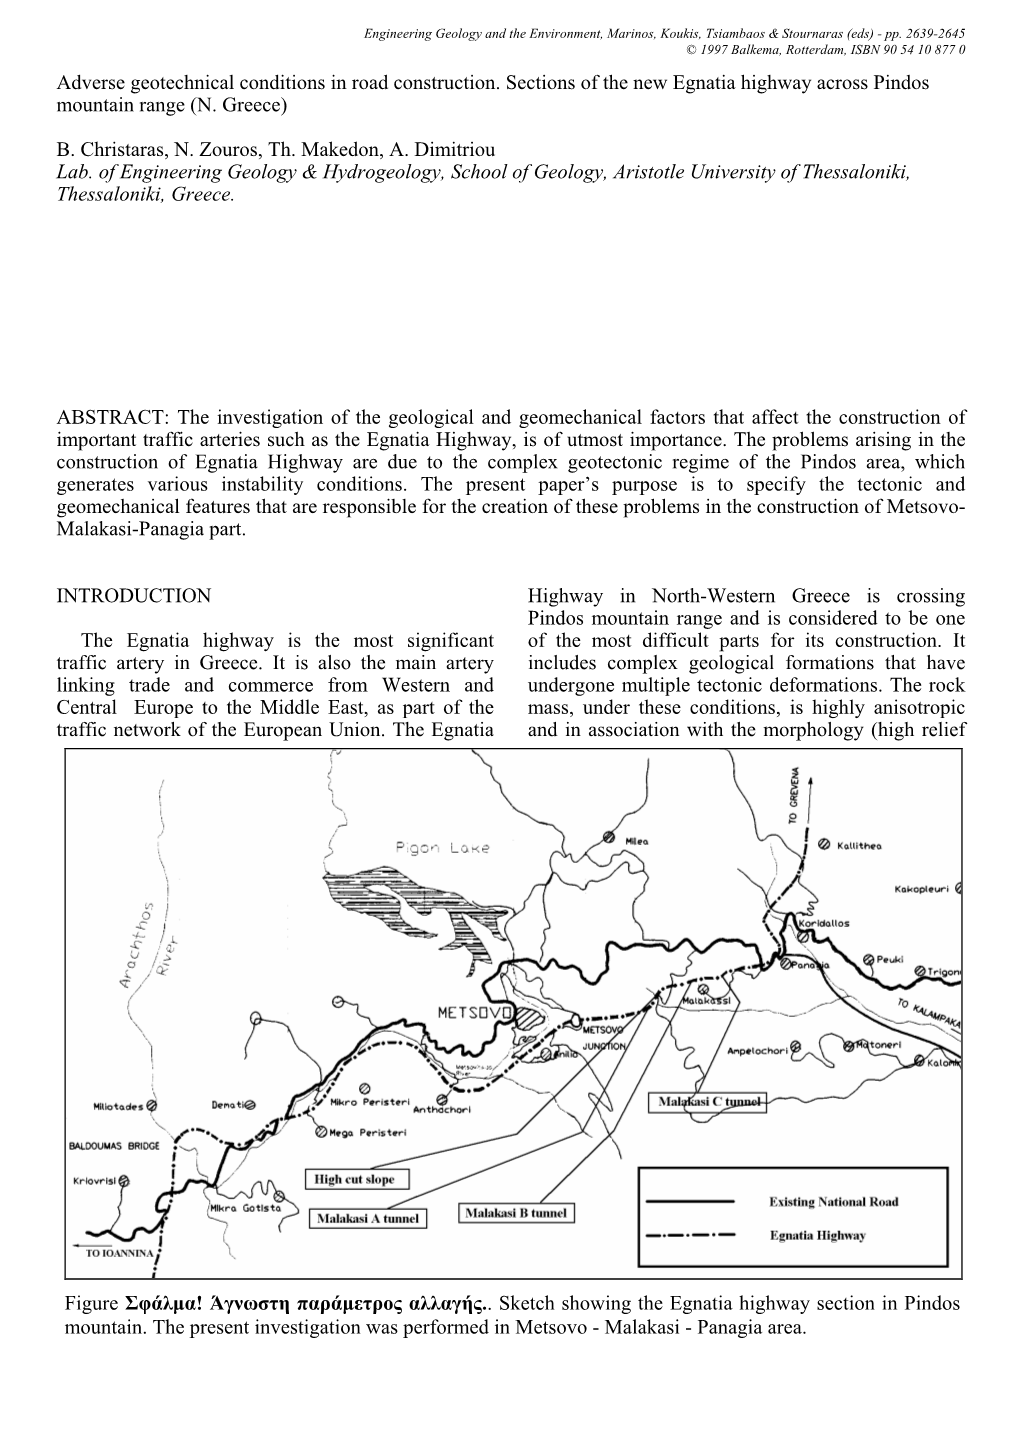 (1997): Adverse Geotechnical Conditions in Road Construction